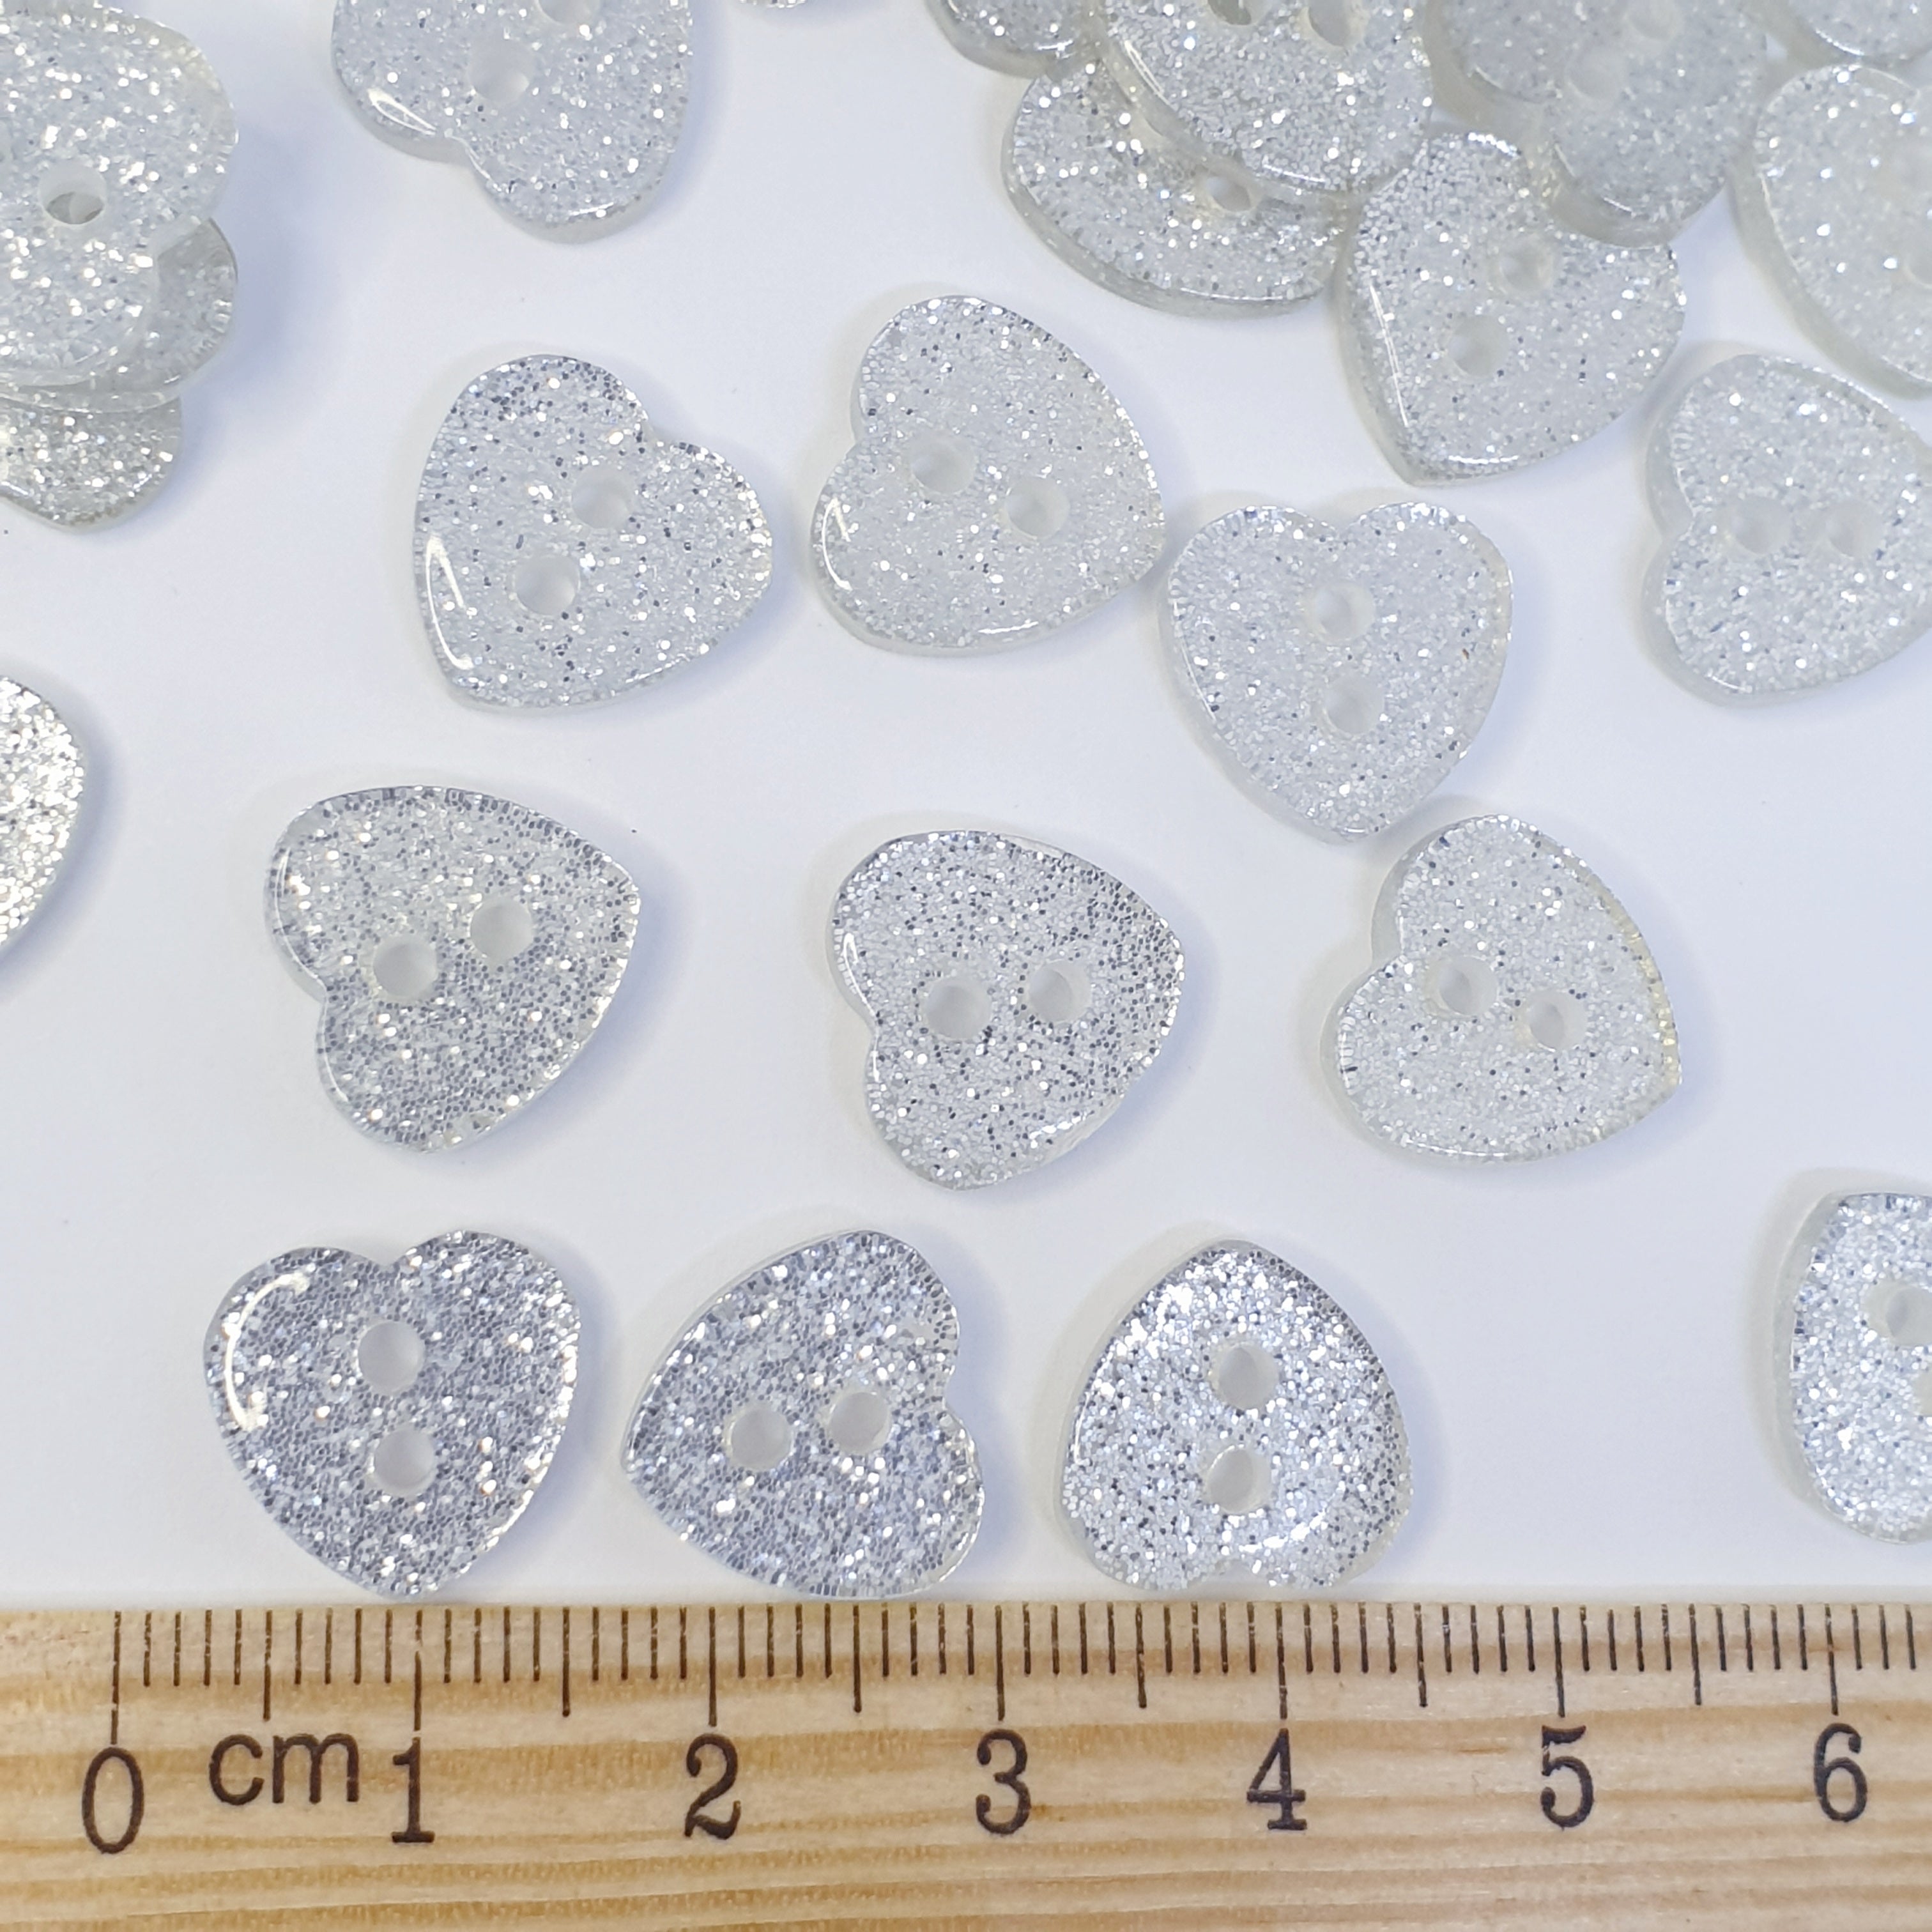 MajorCrafts 40pcs 12.5mm Clear Silver Glitter 2 Holes Small Heart Shaped Resin Sewing Buttons